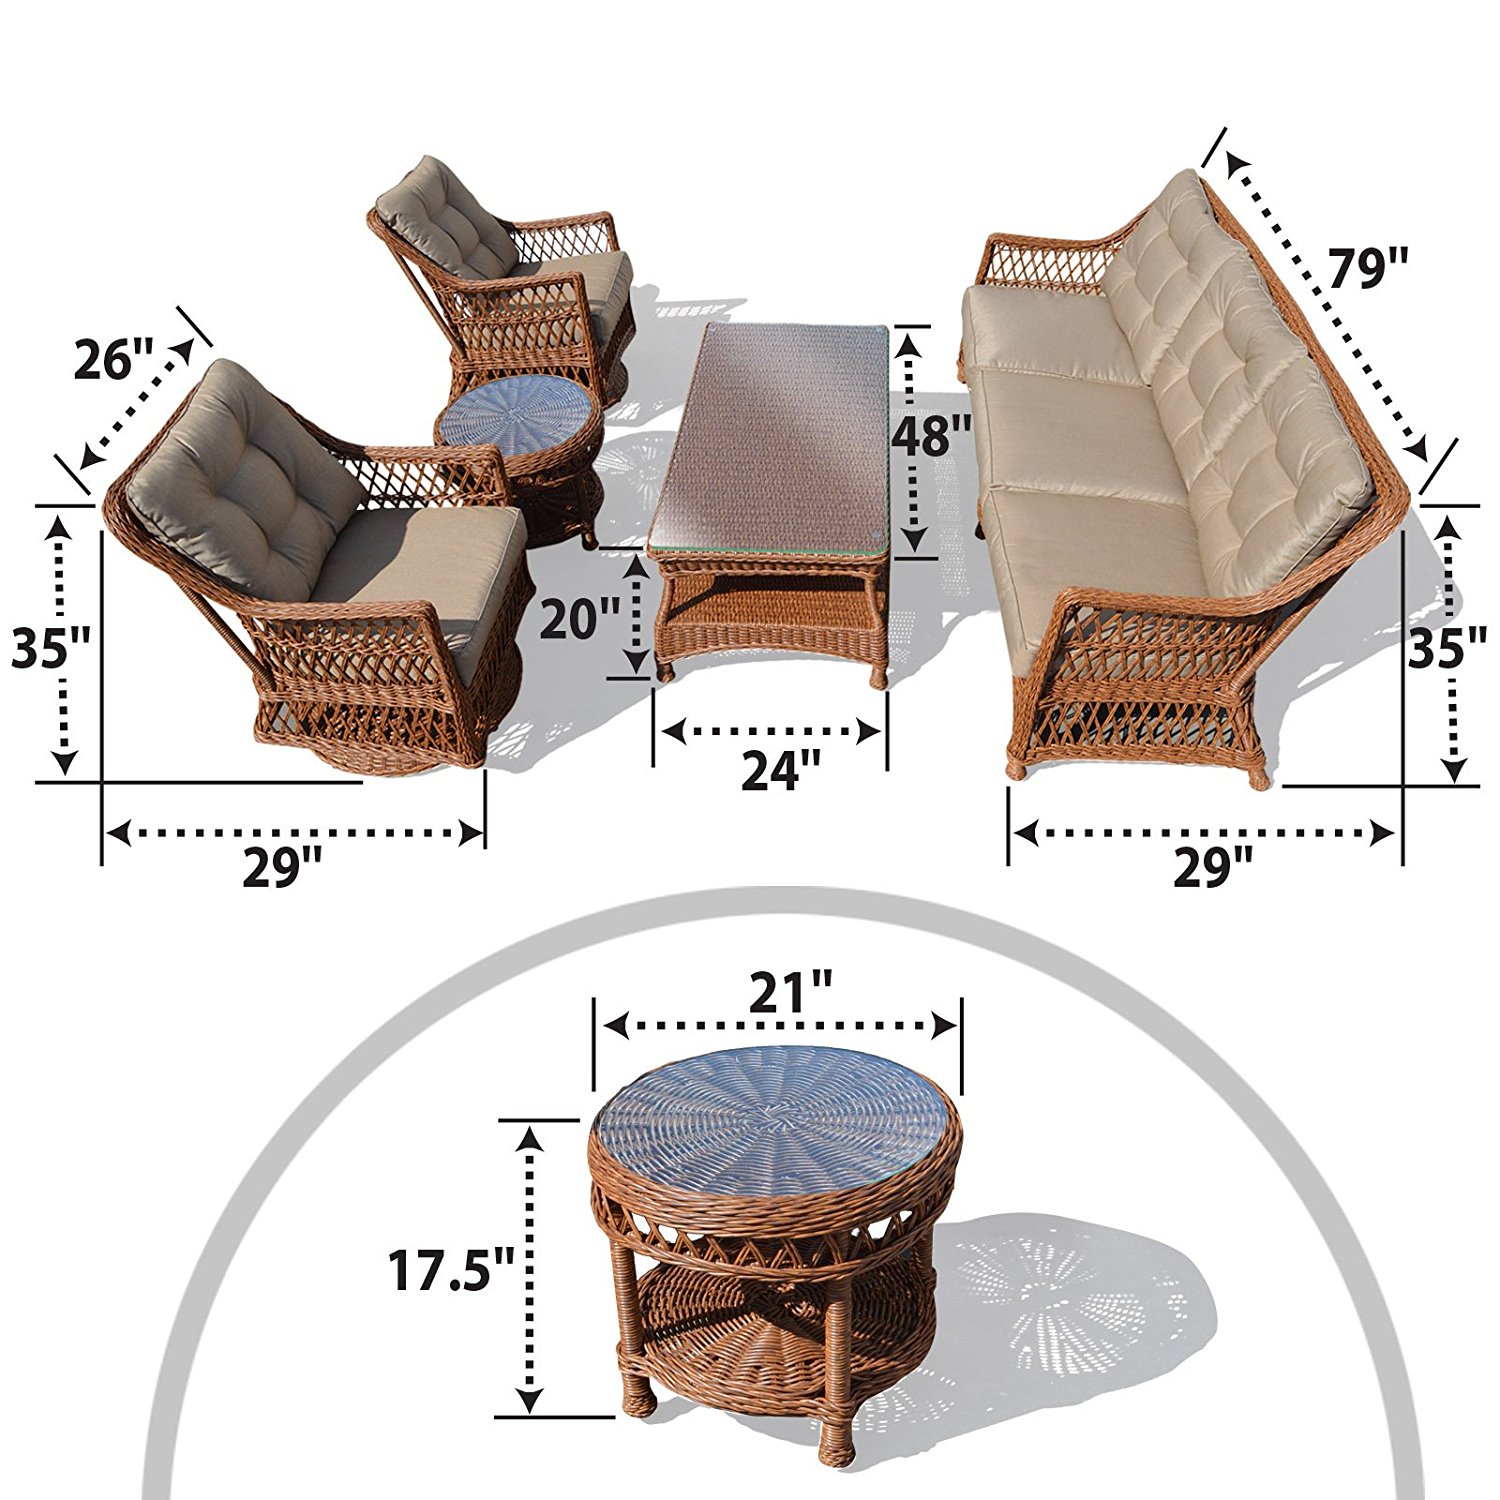 Sunny 5pc Wicker Rattan Table Chair Patio Sofa Furniture Set with Cushions Outdoor Garden W/ 3 Swivel Revolving Chairs and 2 Tables - image 2 of 8